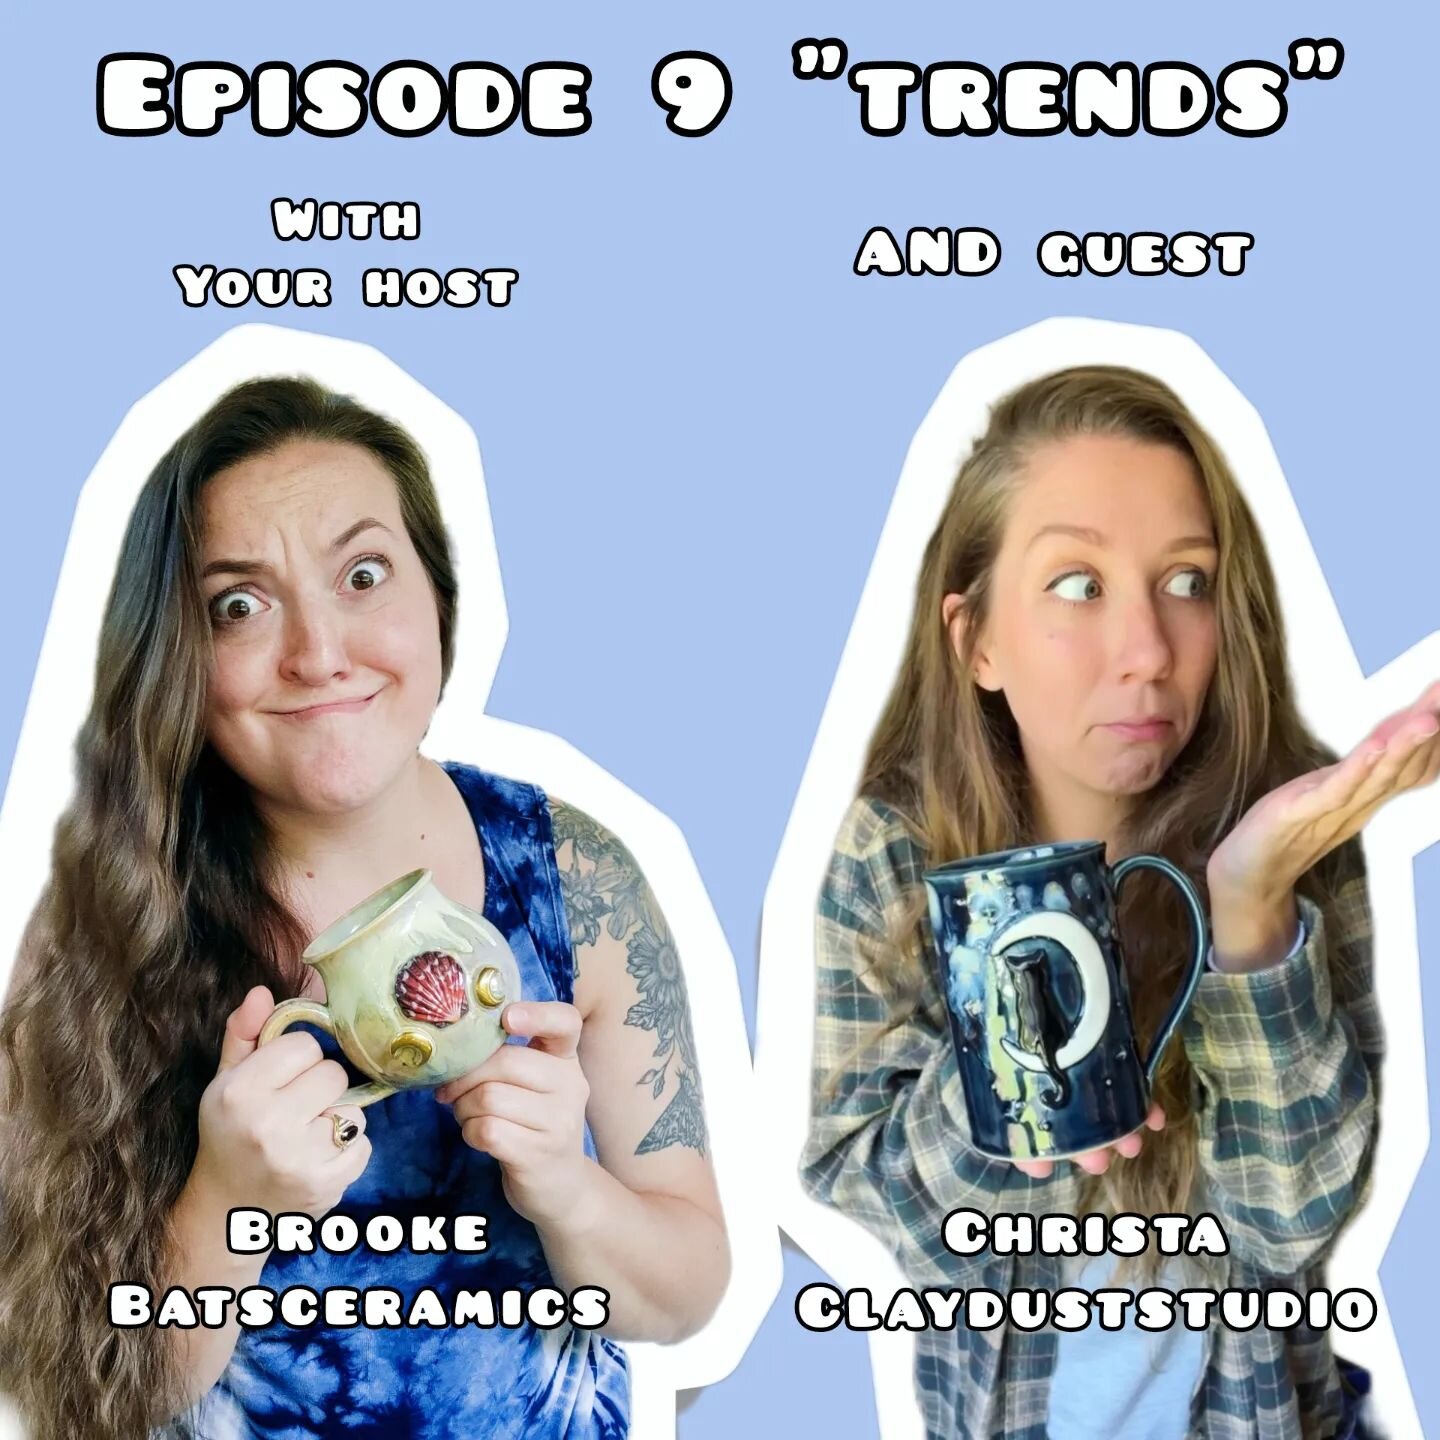 New episode is live!

In this episode I bring back my gal Christa @clayduststudio to talk about trends. We could've brought up so many more things within the topic but we ended up spilling a lot of tea! We name drop MANY artists, talk about our past 